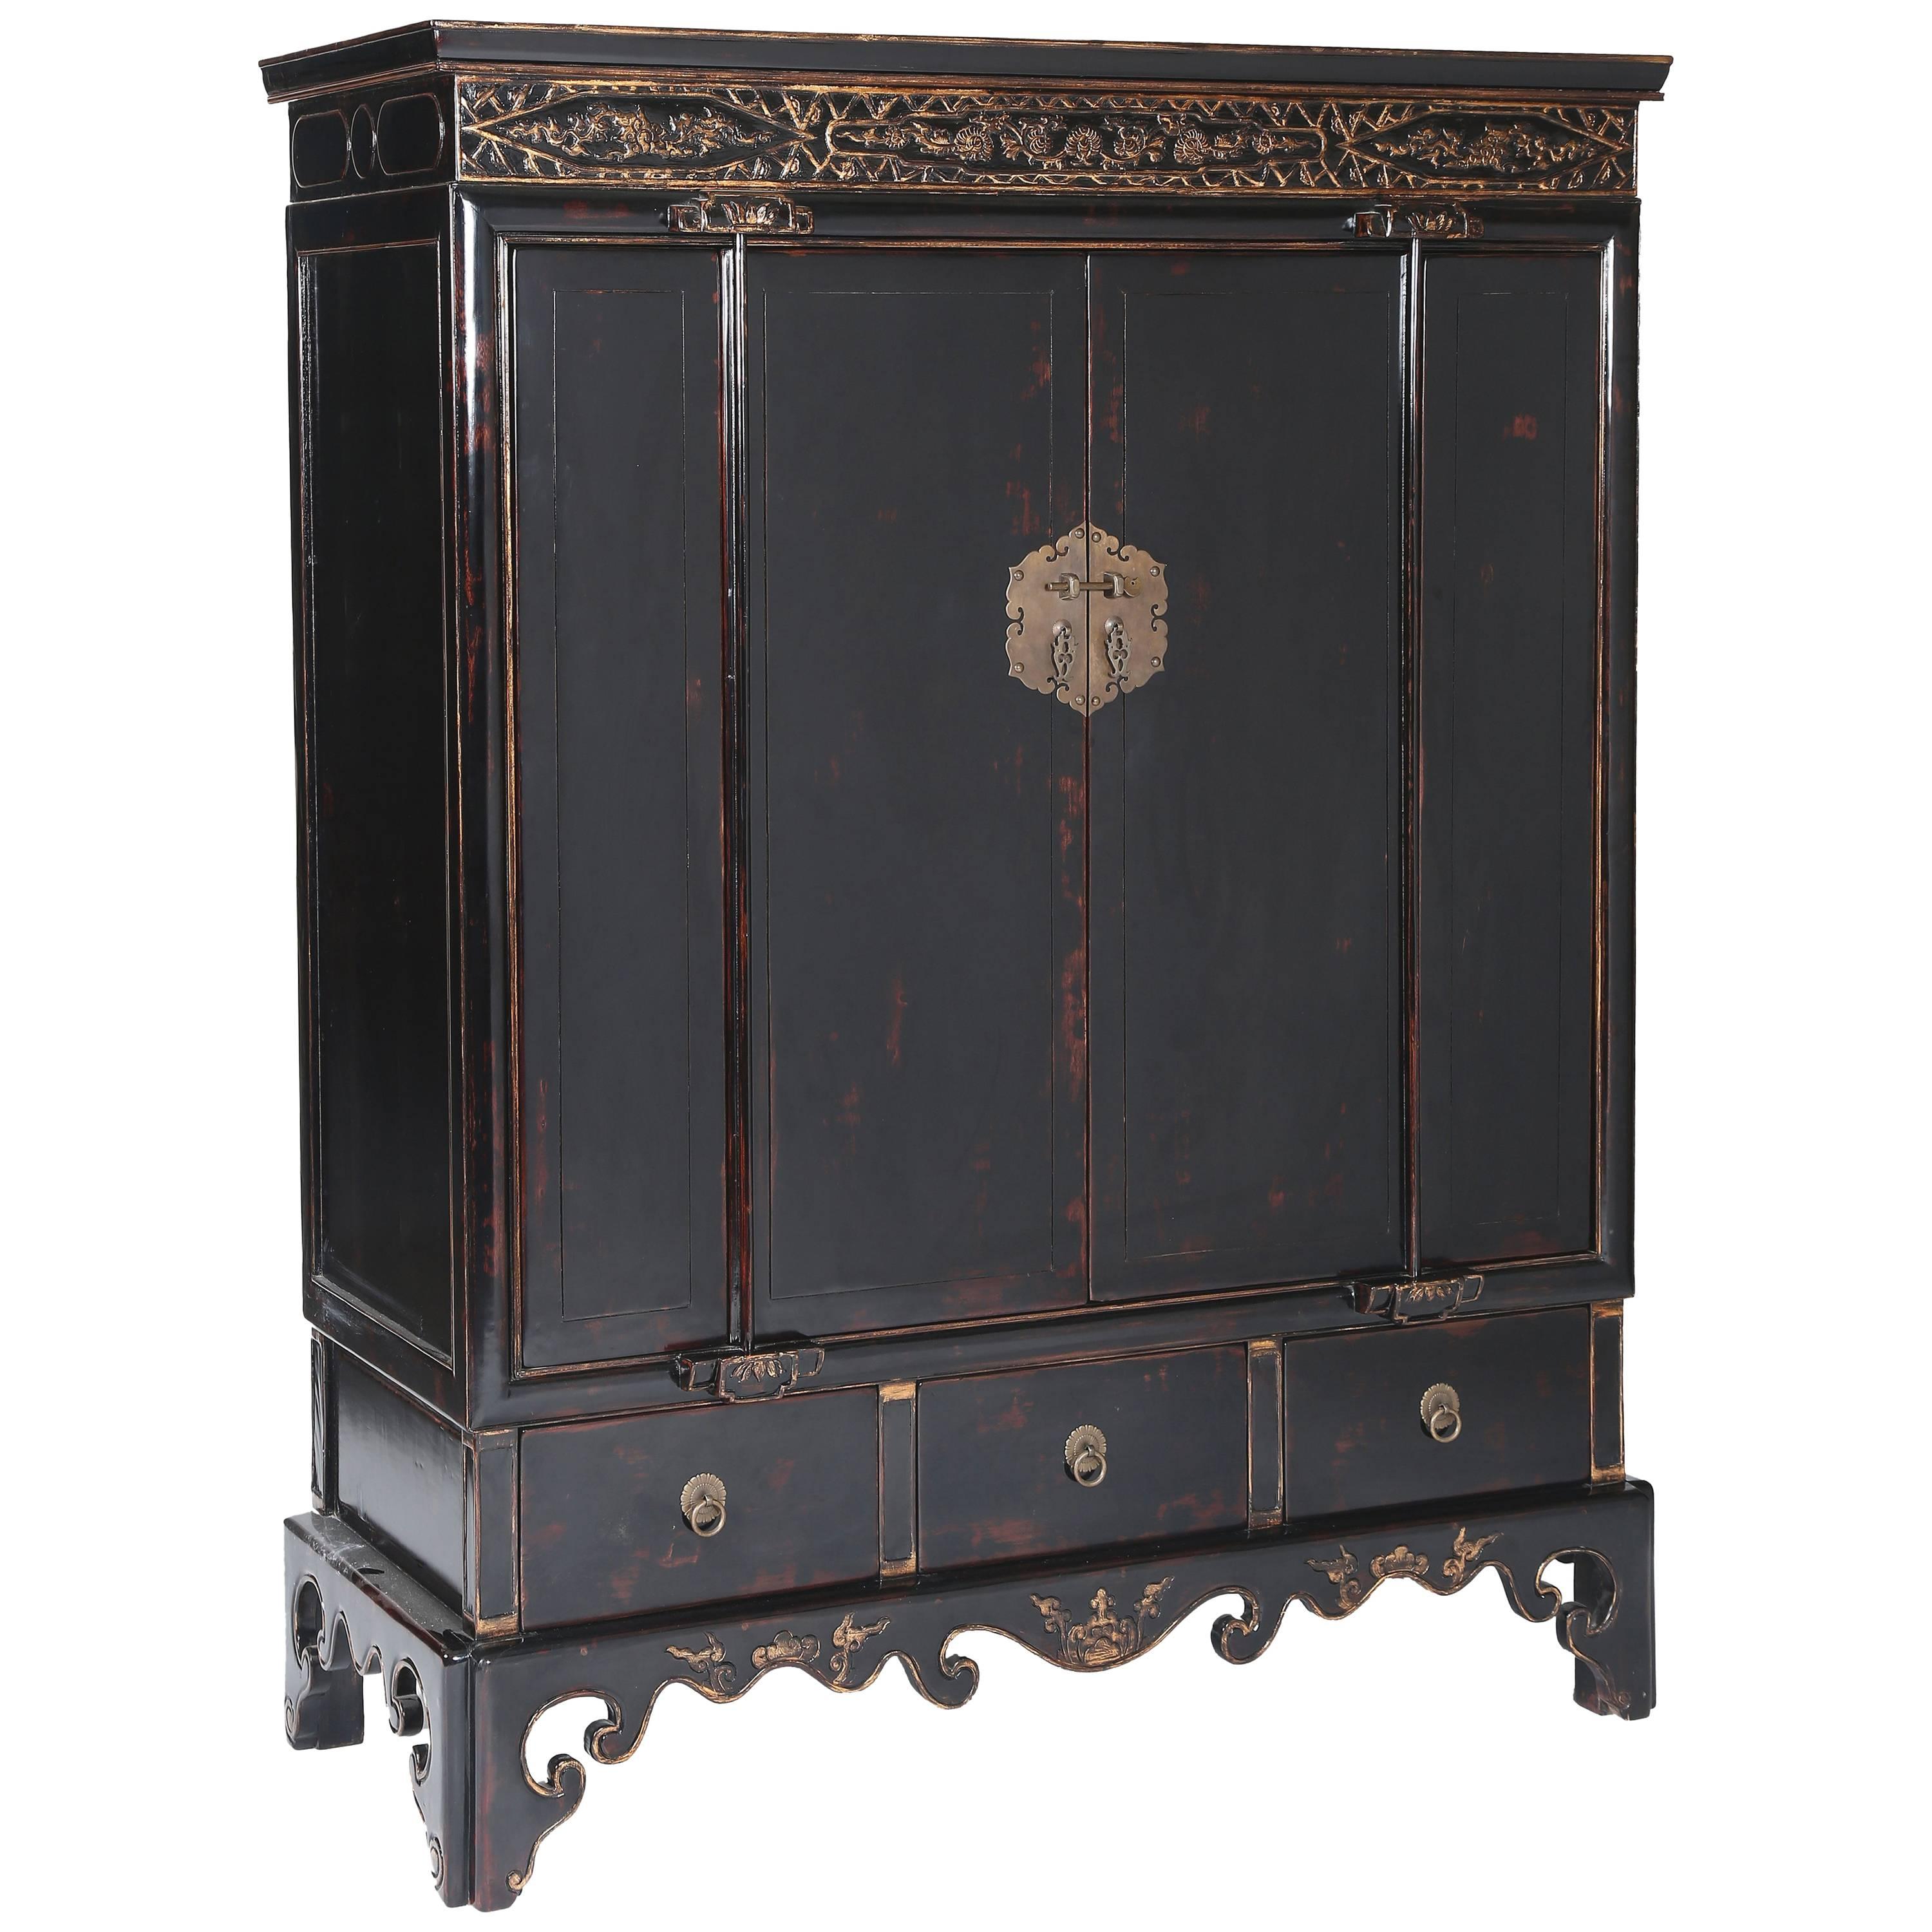 19th Century Chinoiserie Cabinet, Black Lacquer with Gilt Relief-Carved Motifs